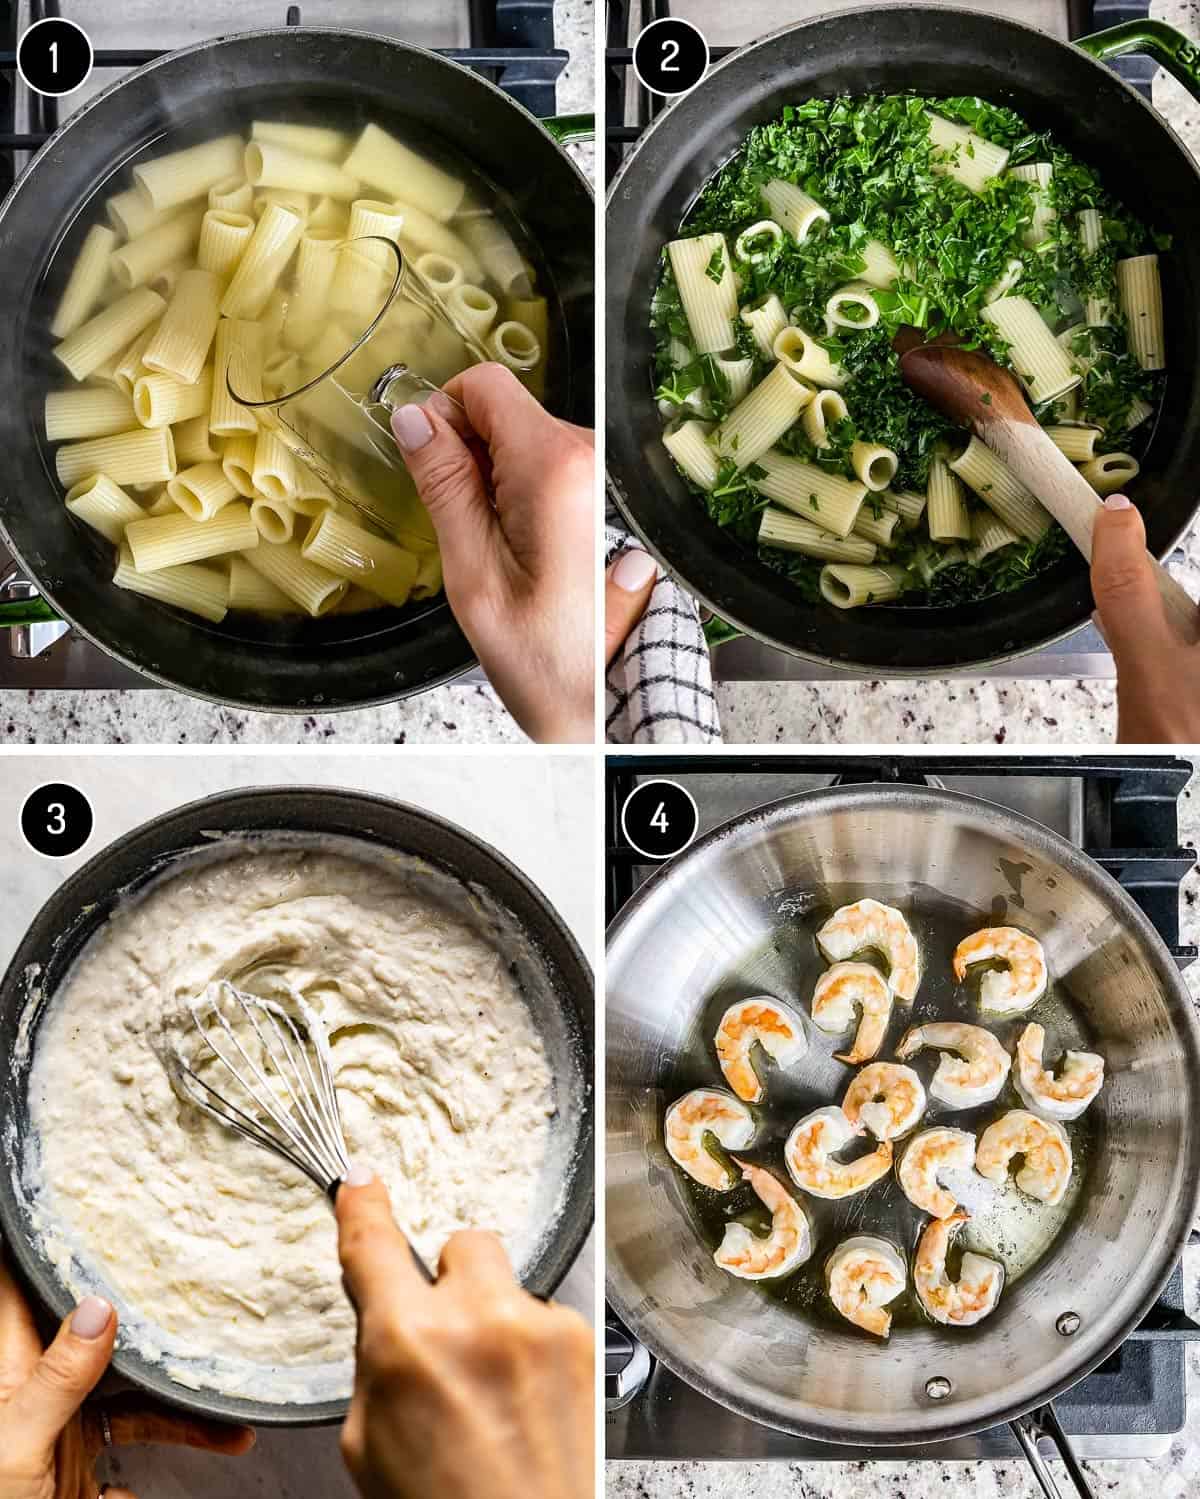 A collage of images showing how to make shrimp ricotta pasta.